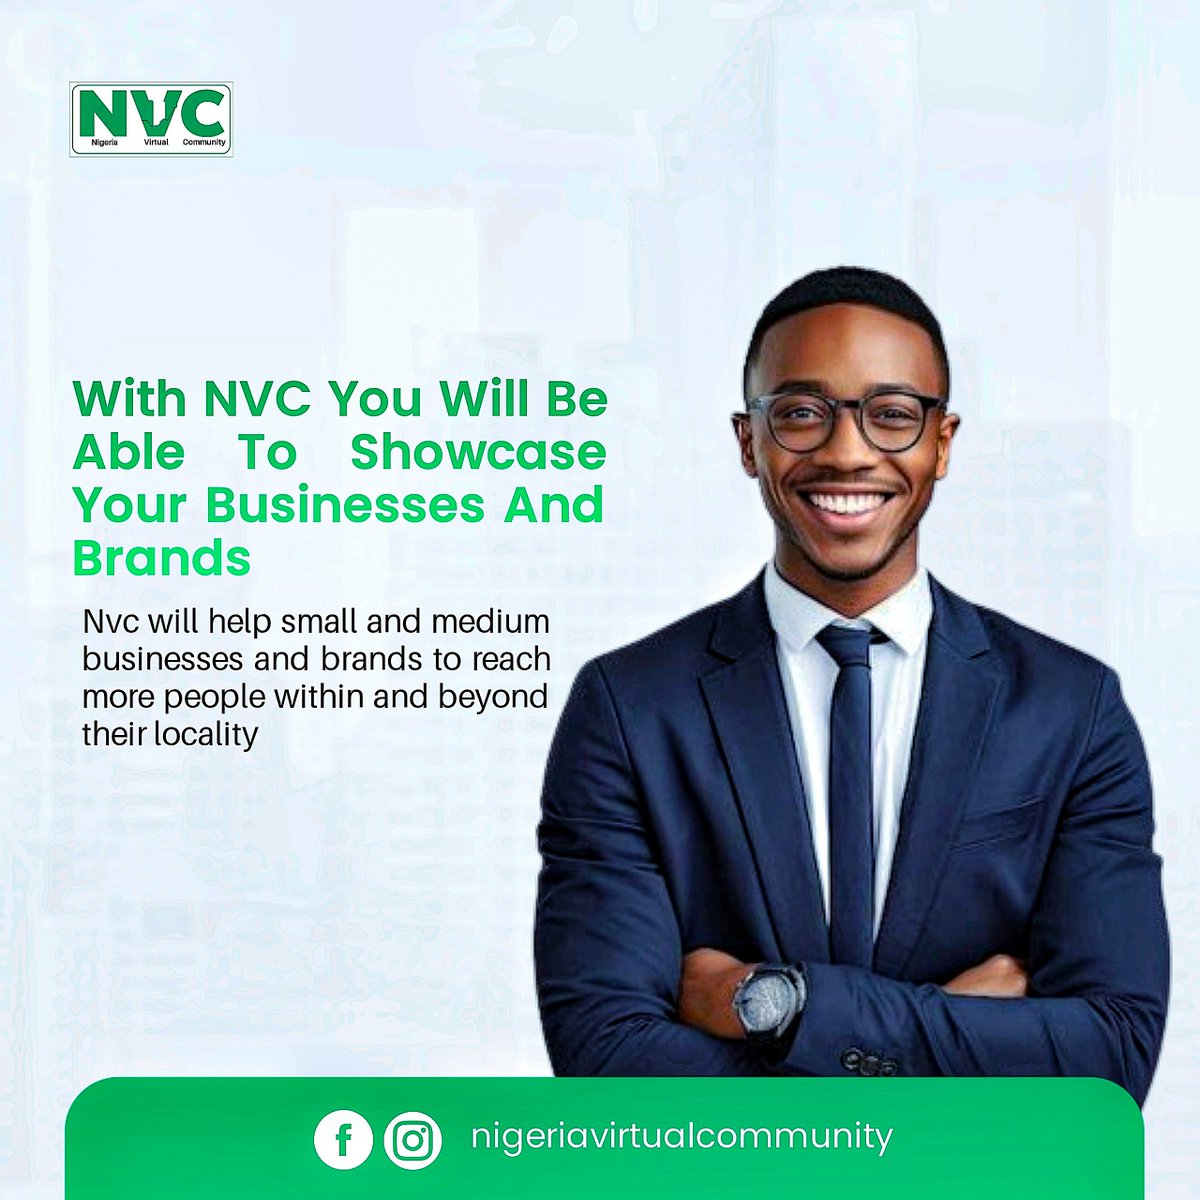 NVC is here to take your business to the next level.

#BusinessGrowth 
#BusinessSuccess 
#businessplanning 
#BusinessStrategy